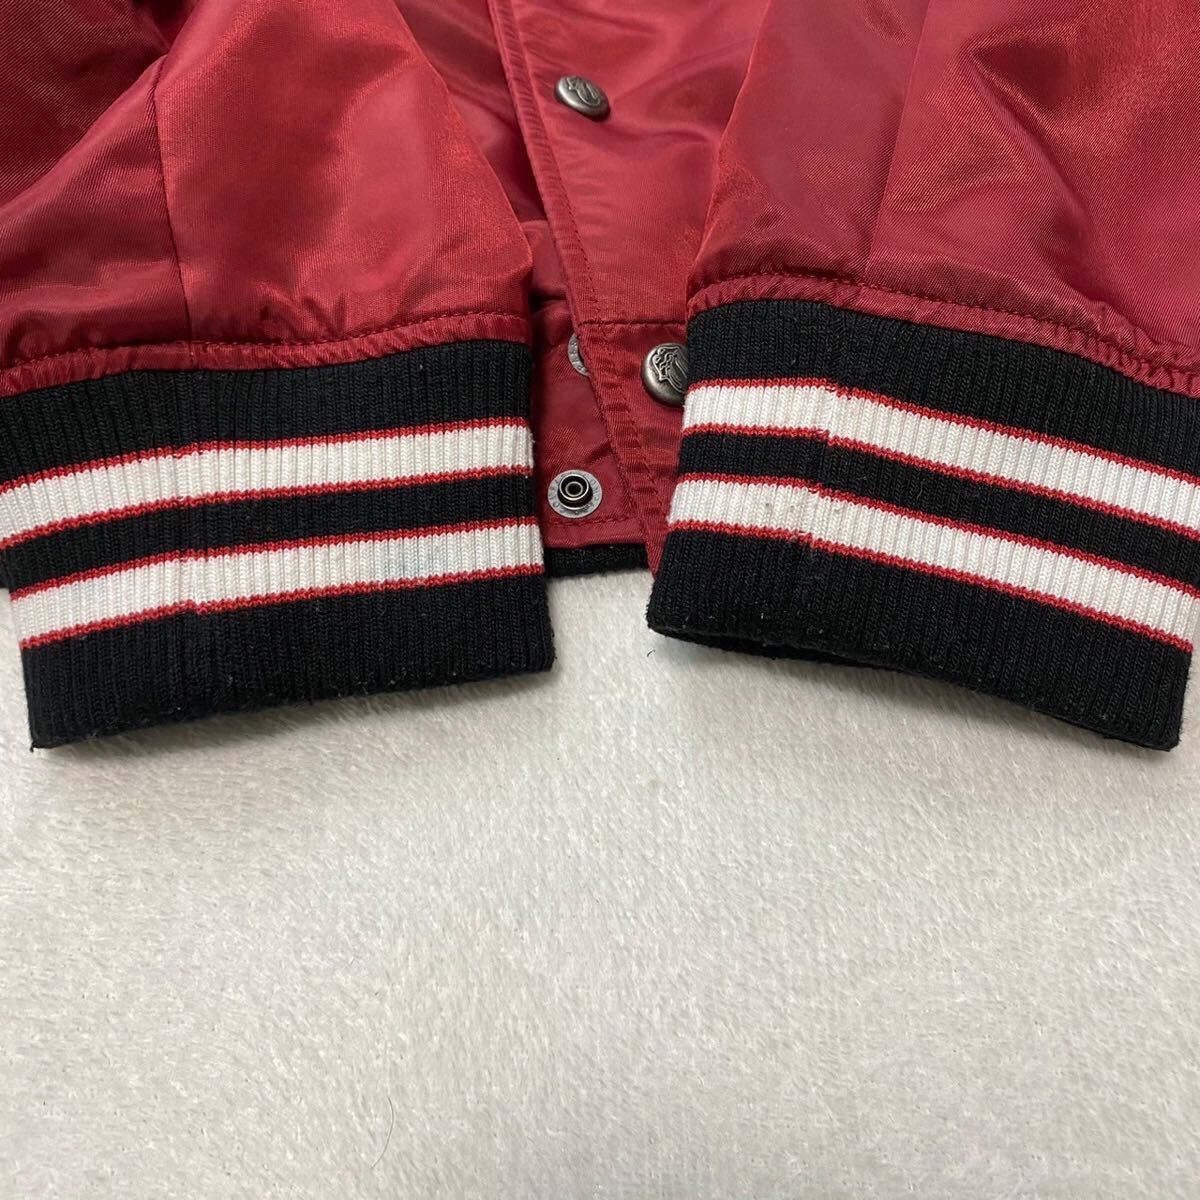  rare XL ultimate beautiful goods!!THE ROLLING STONES low ring Stone z ram leather switch sheep leather MA-1 flight jacket blouson embroidery rib line red 5